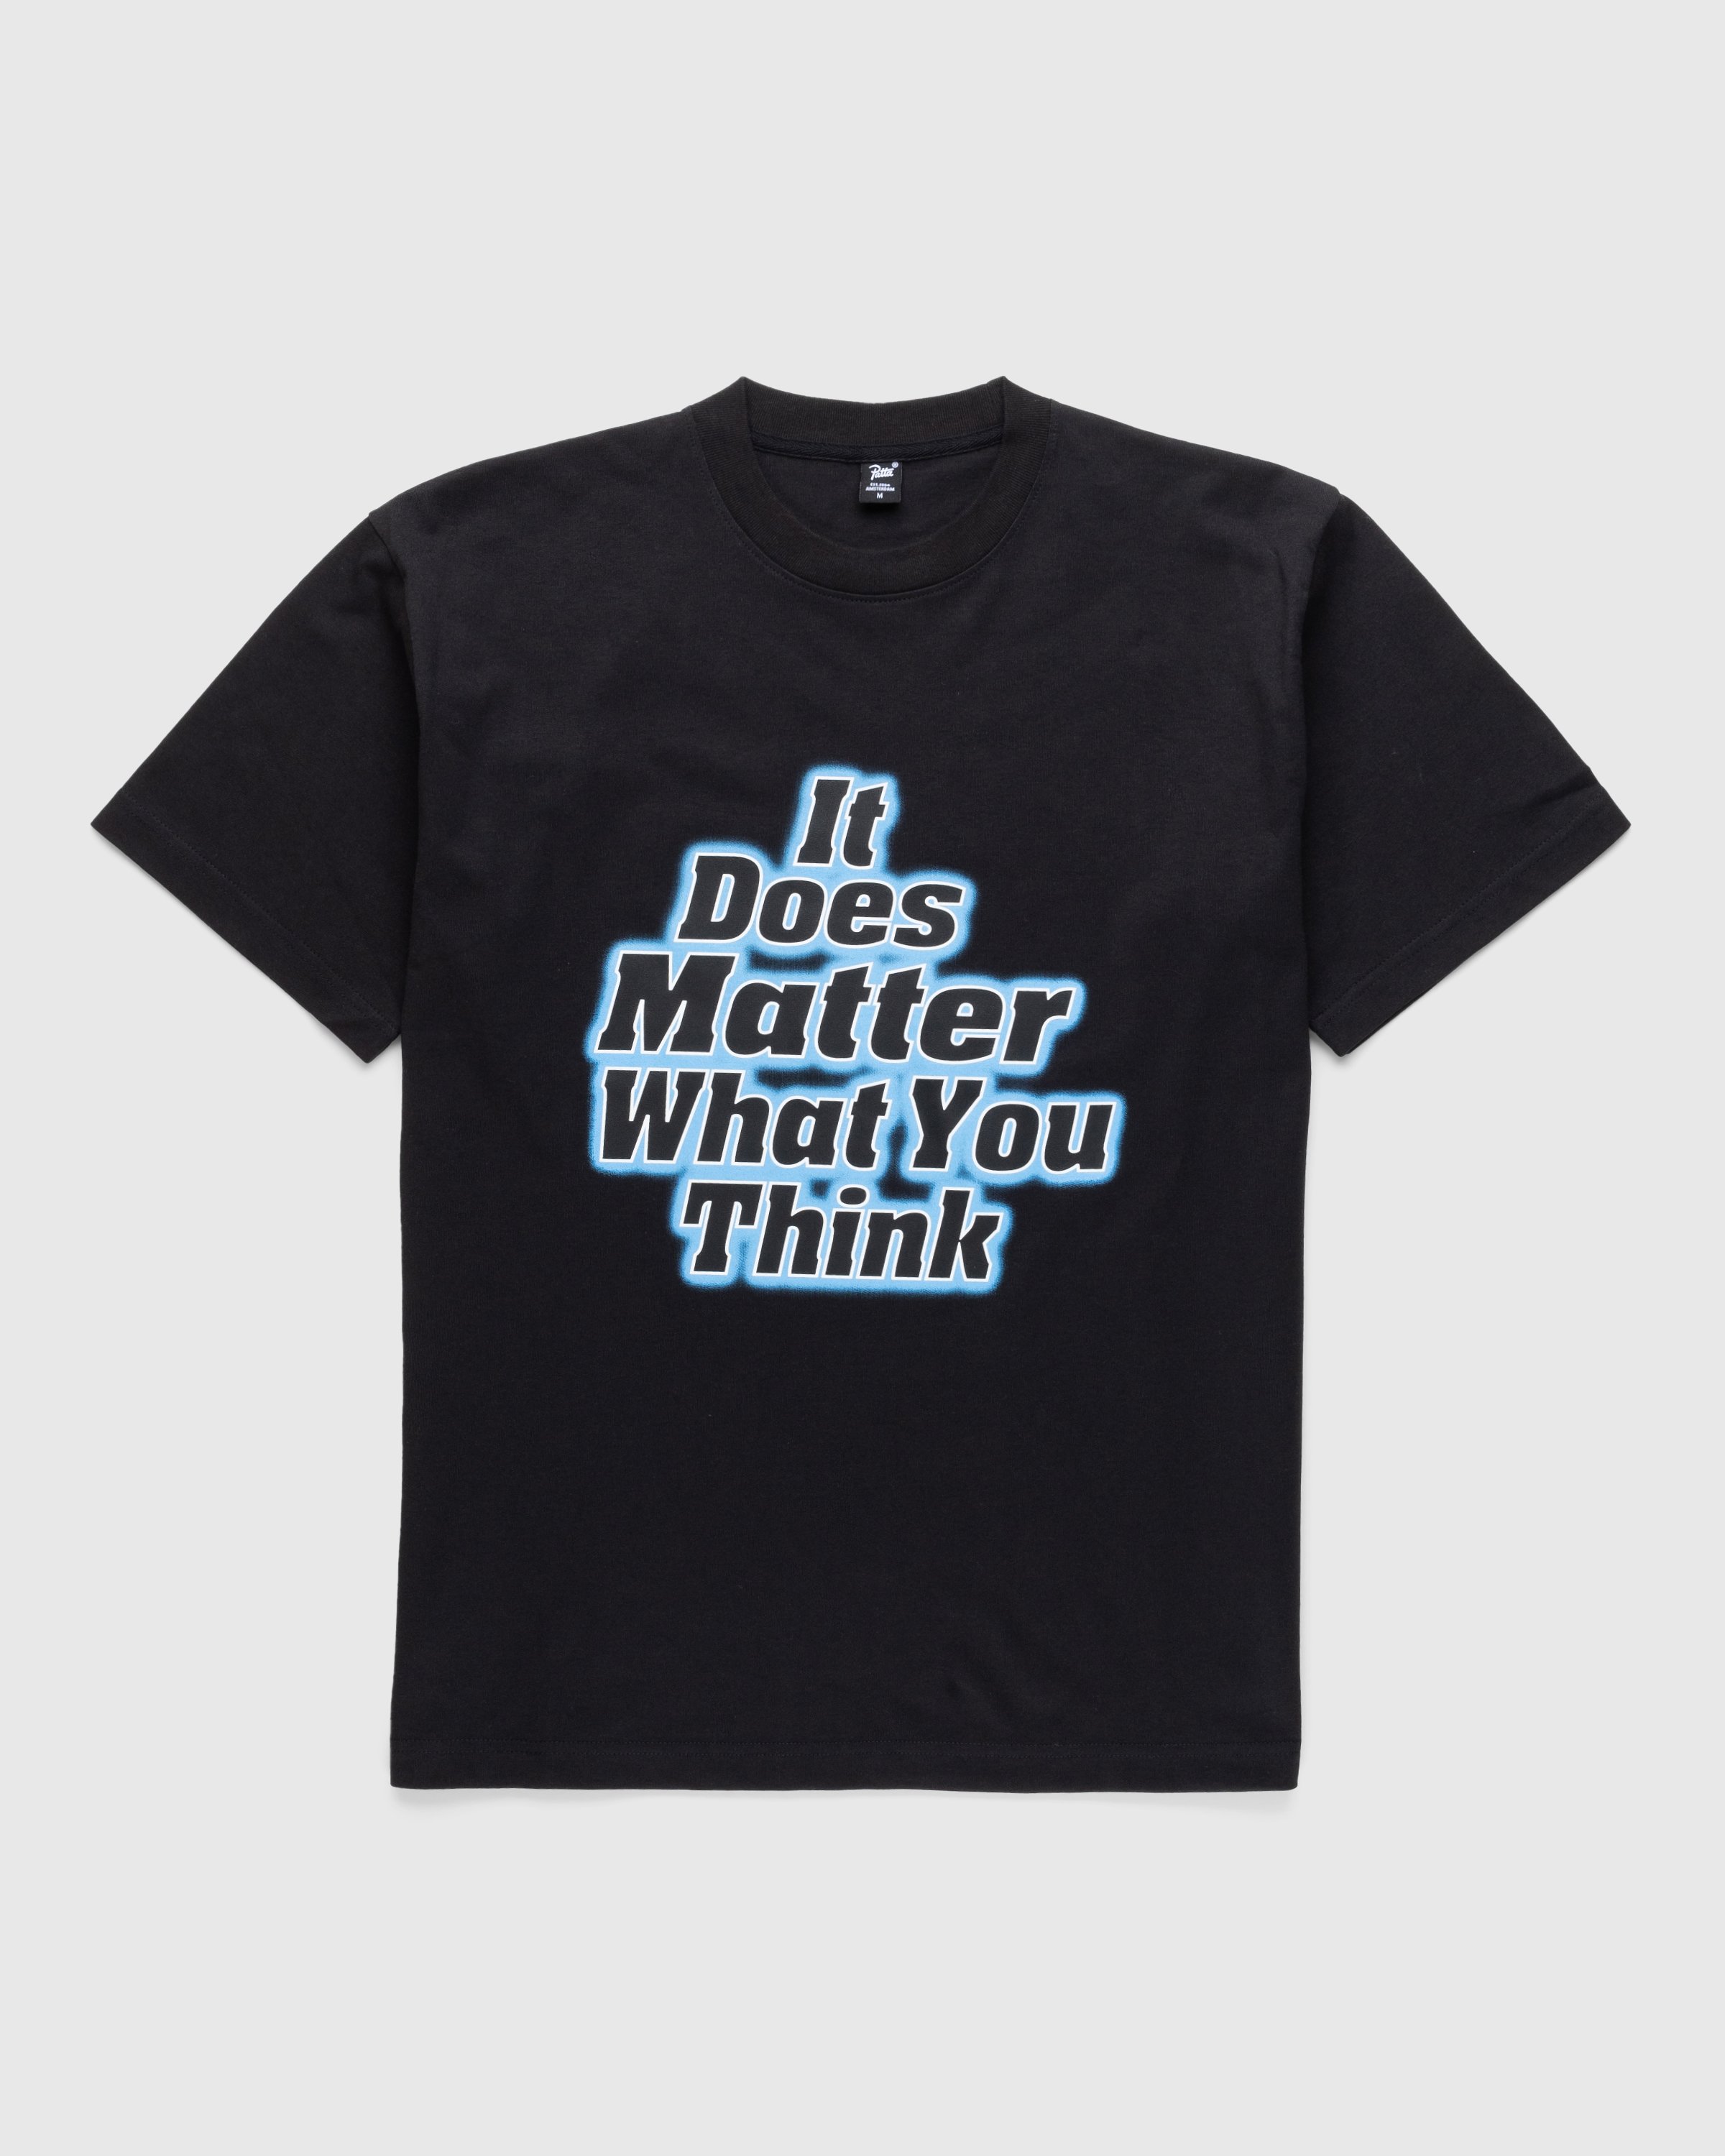 Patta - It Does Matter What You Think T-Shirt Black - Clothing - Black - Image 1